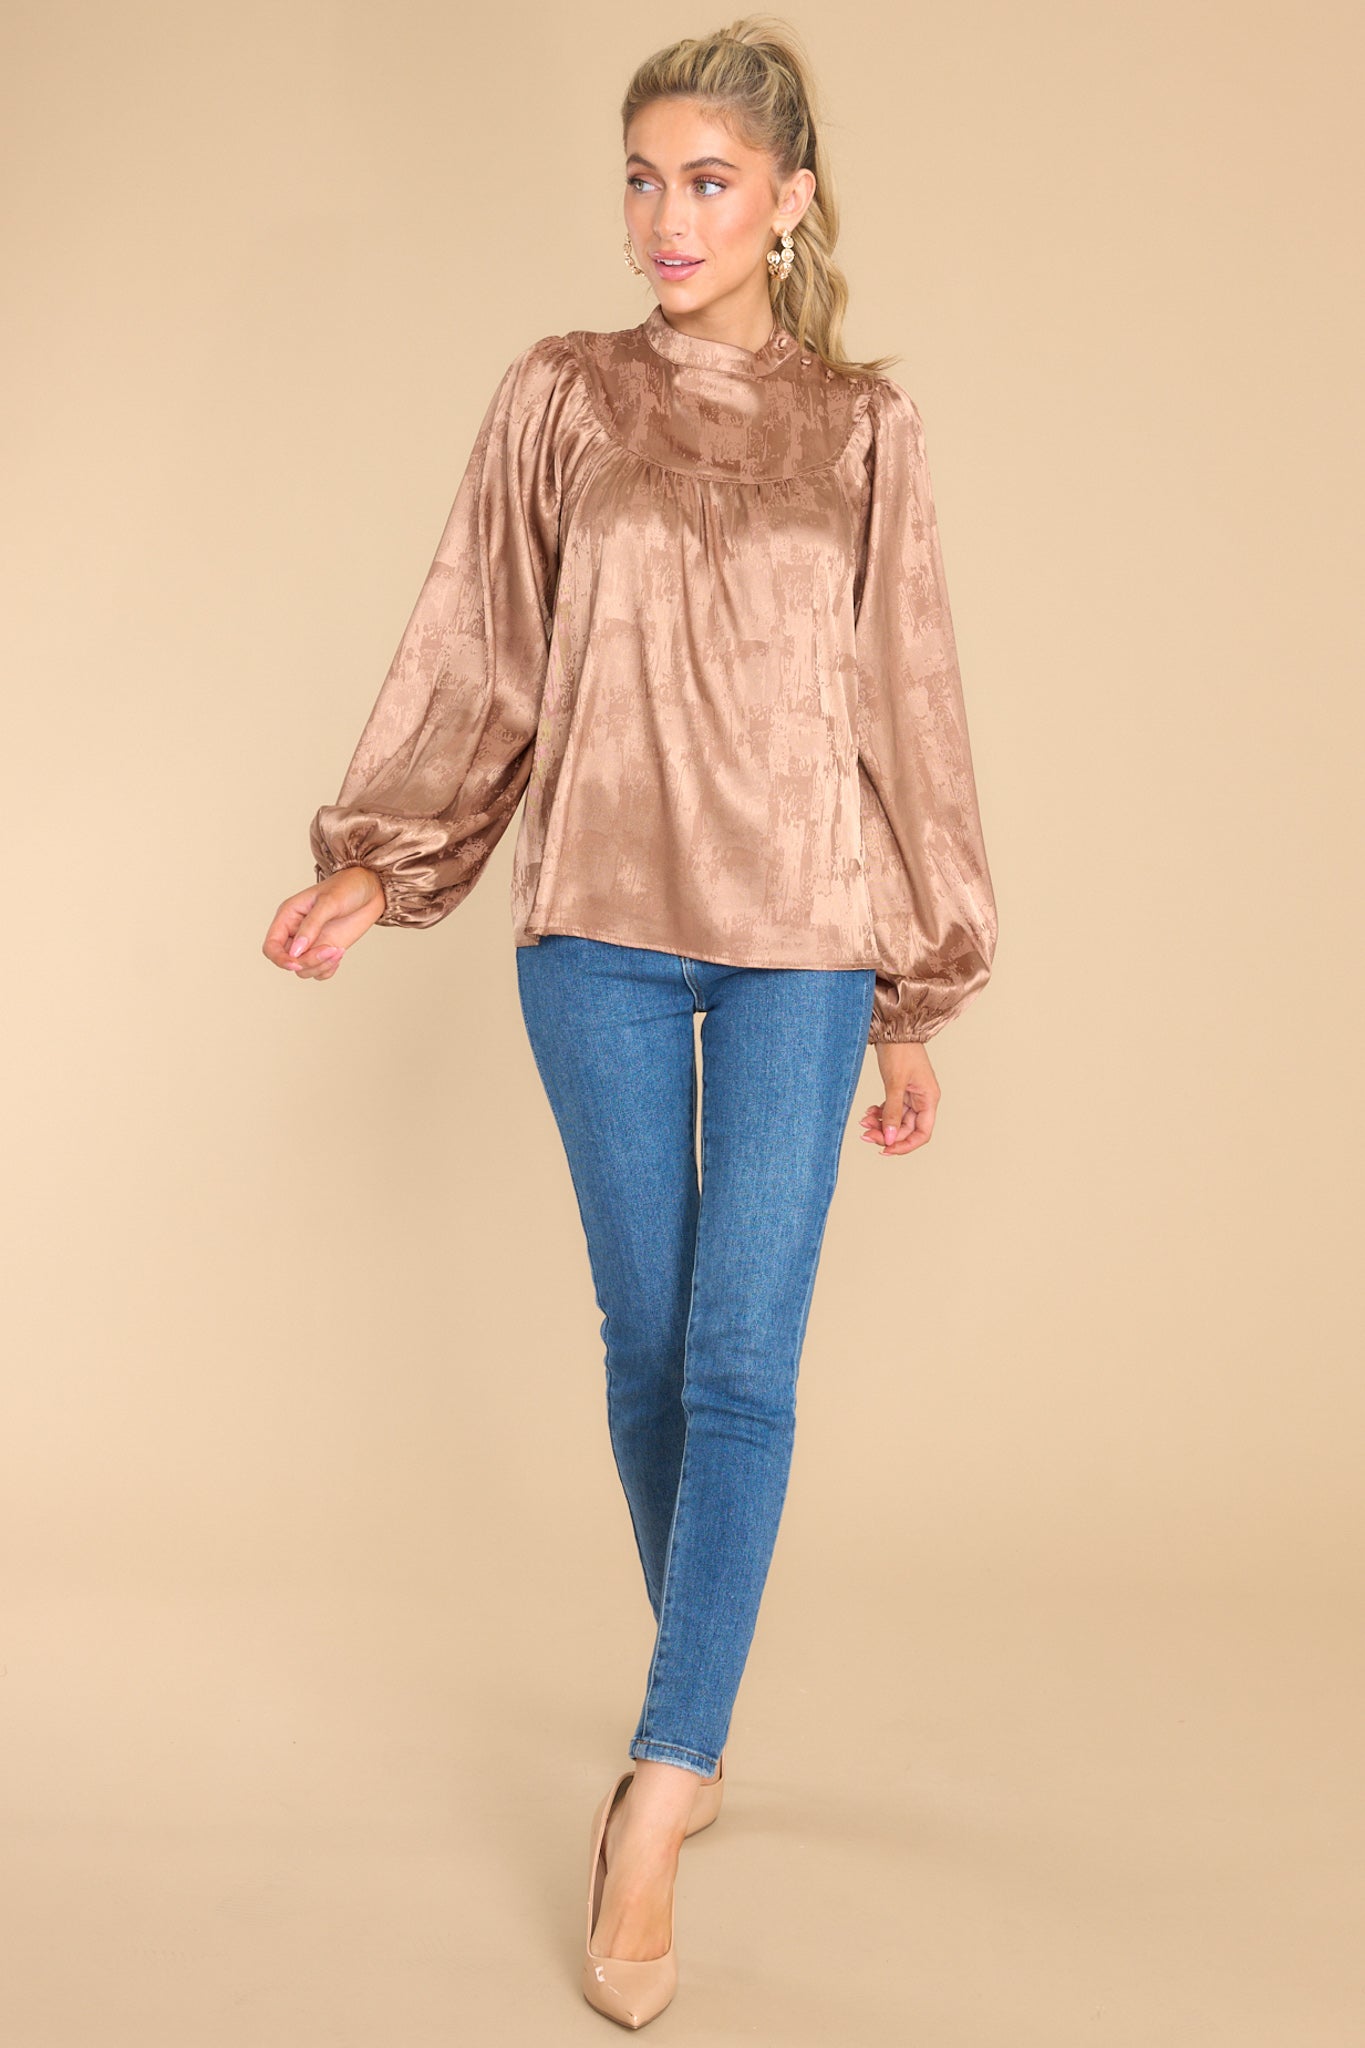 This light brown shiny satin-like top features a high neckline with buttons on the side, balloon sleeves, and elastic cuffs.